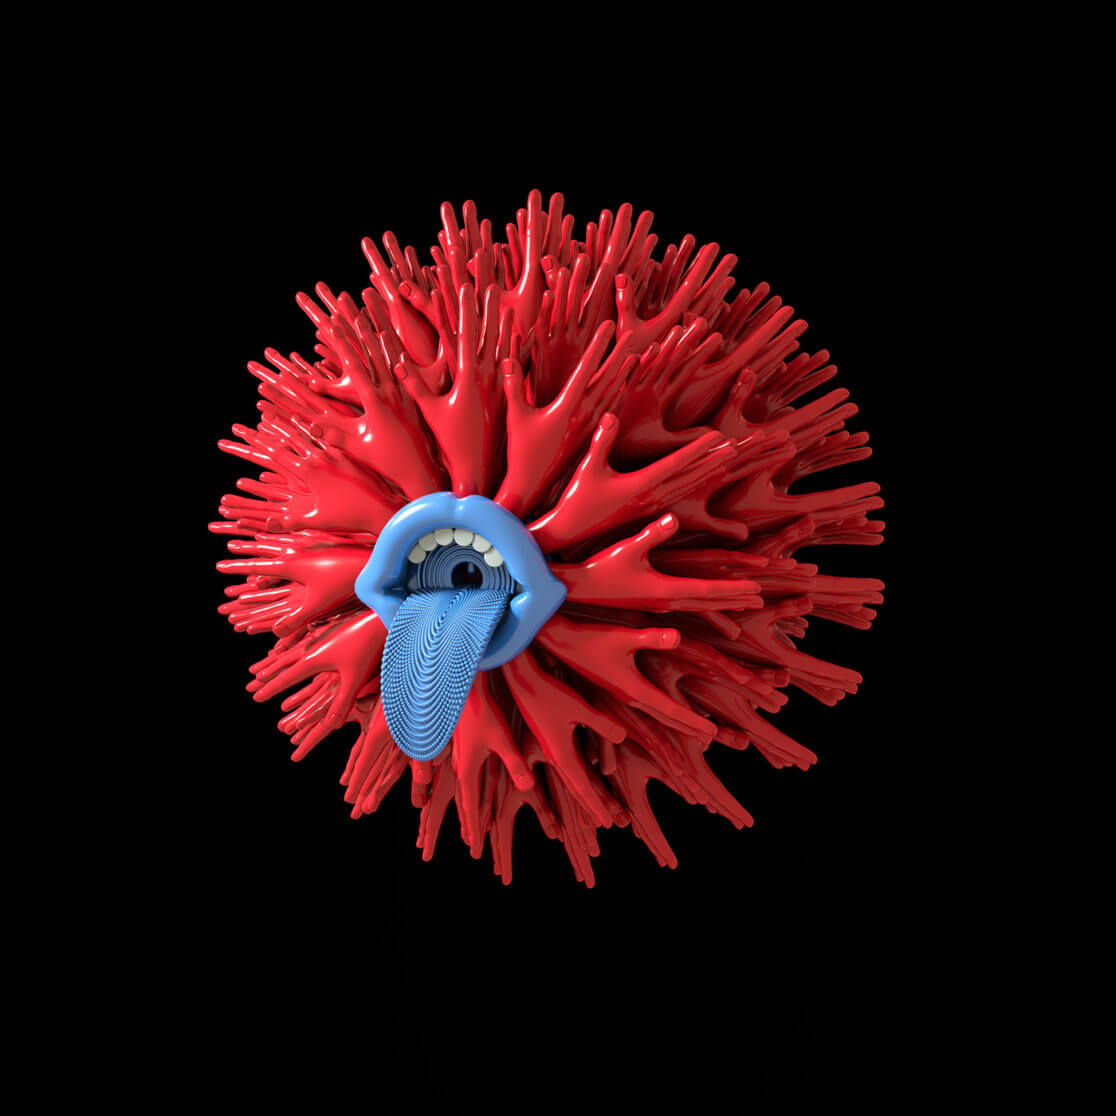 Artistic vinyl design of a red germ with blue mouth